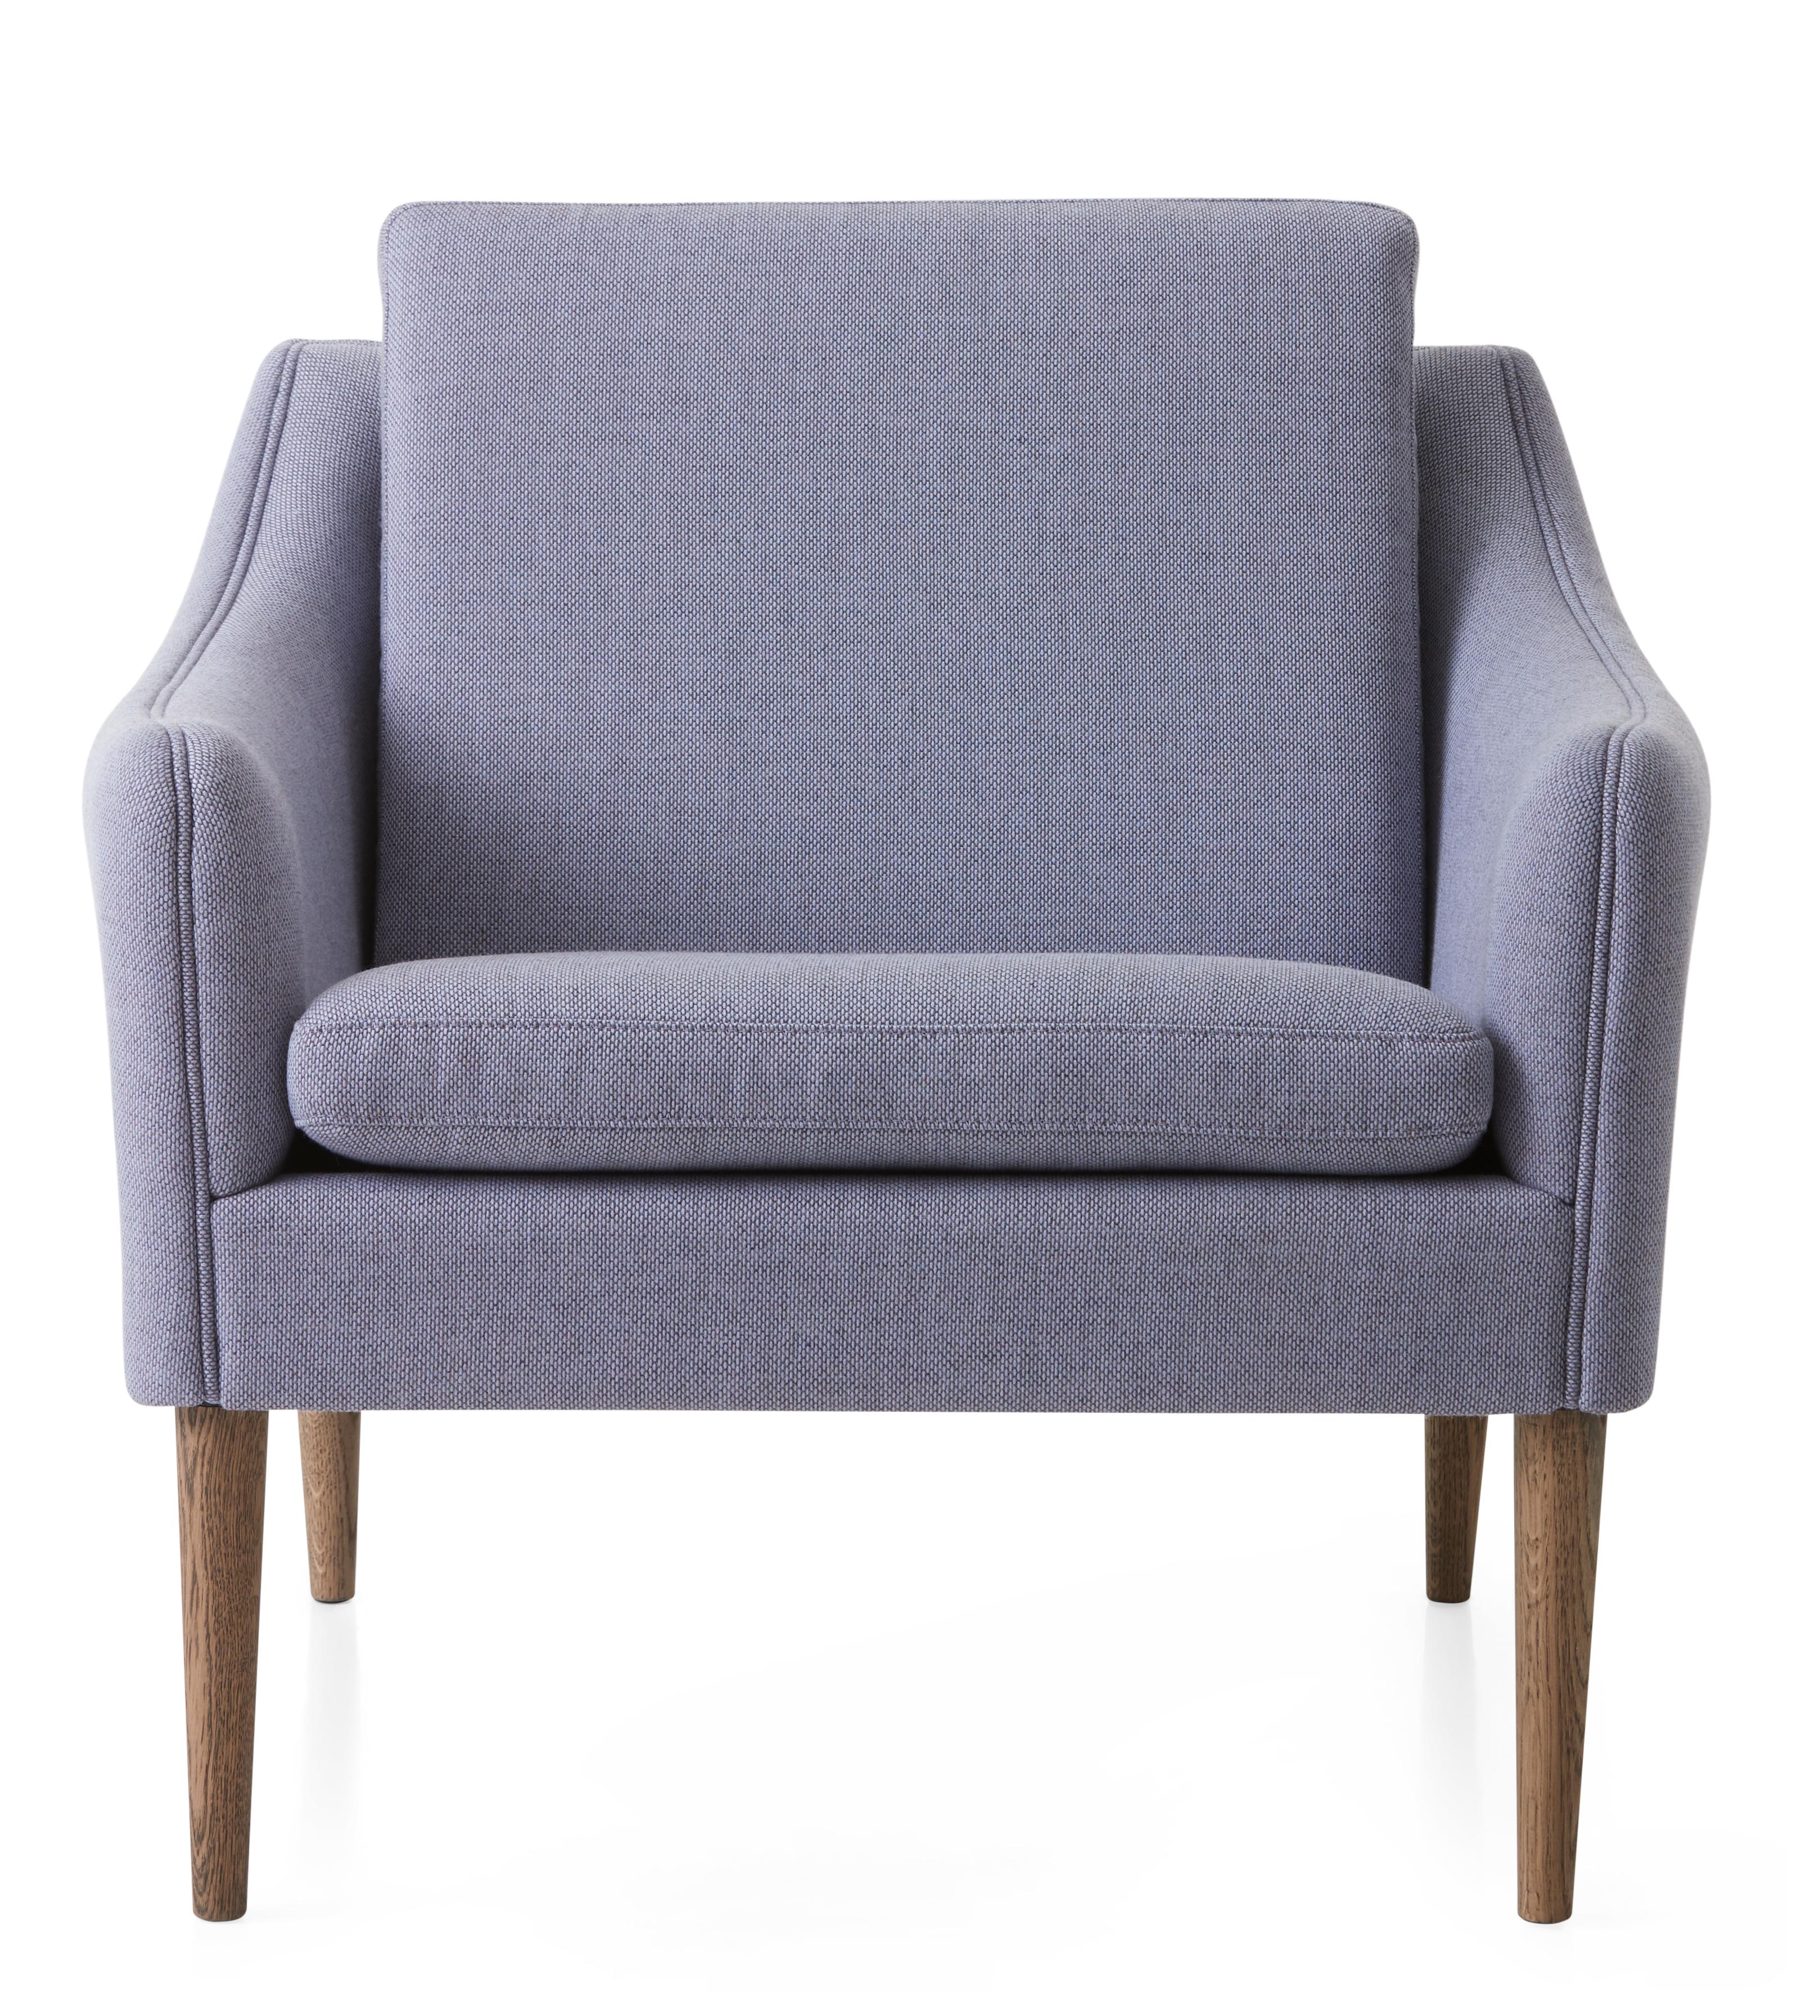 For Sale: Blue (Rewool 658) Mr. Olsen Lounge Chair with Smoked Legs, by Hans Olsen from Warm Nordic